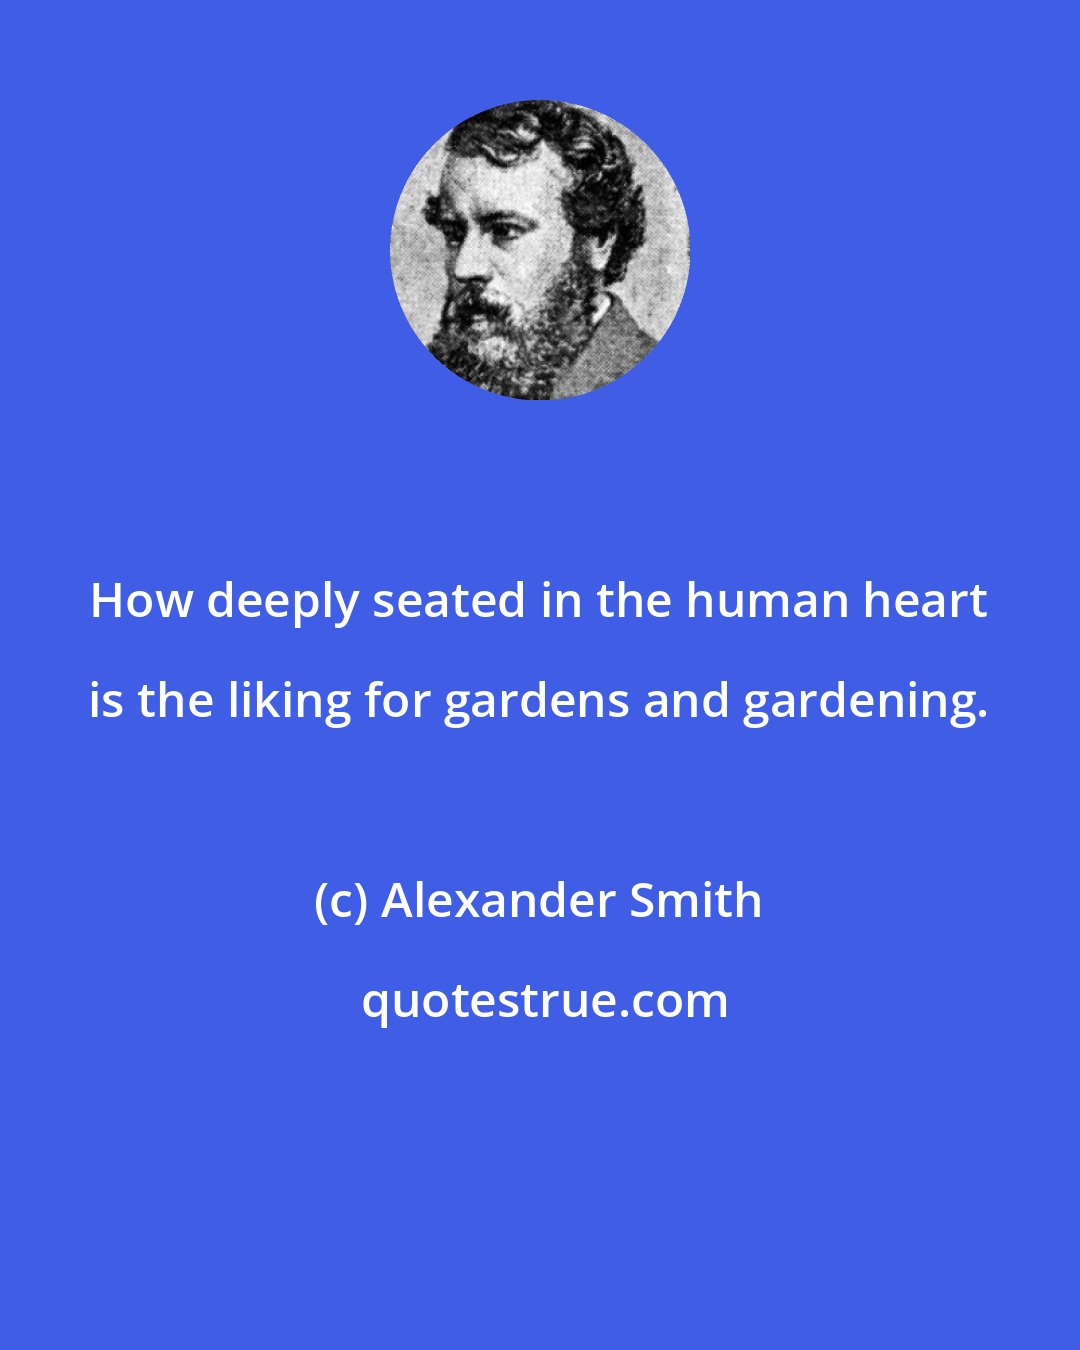 Alexander Smith: How deeply seated in the human heart is the liking for gardens and gardening.